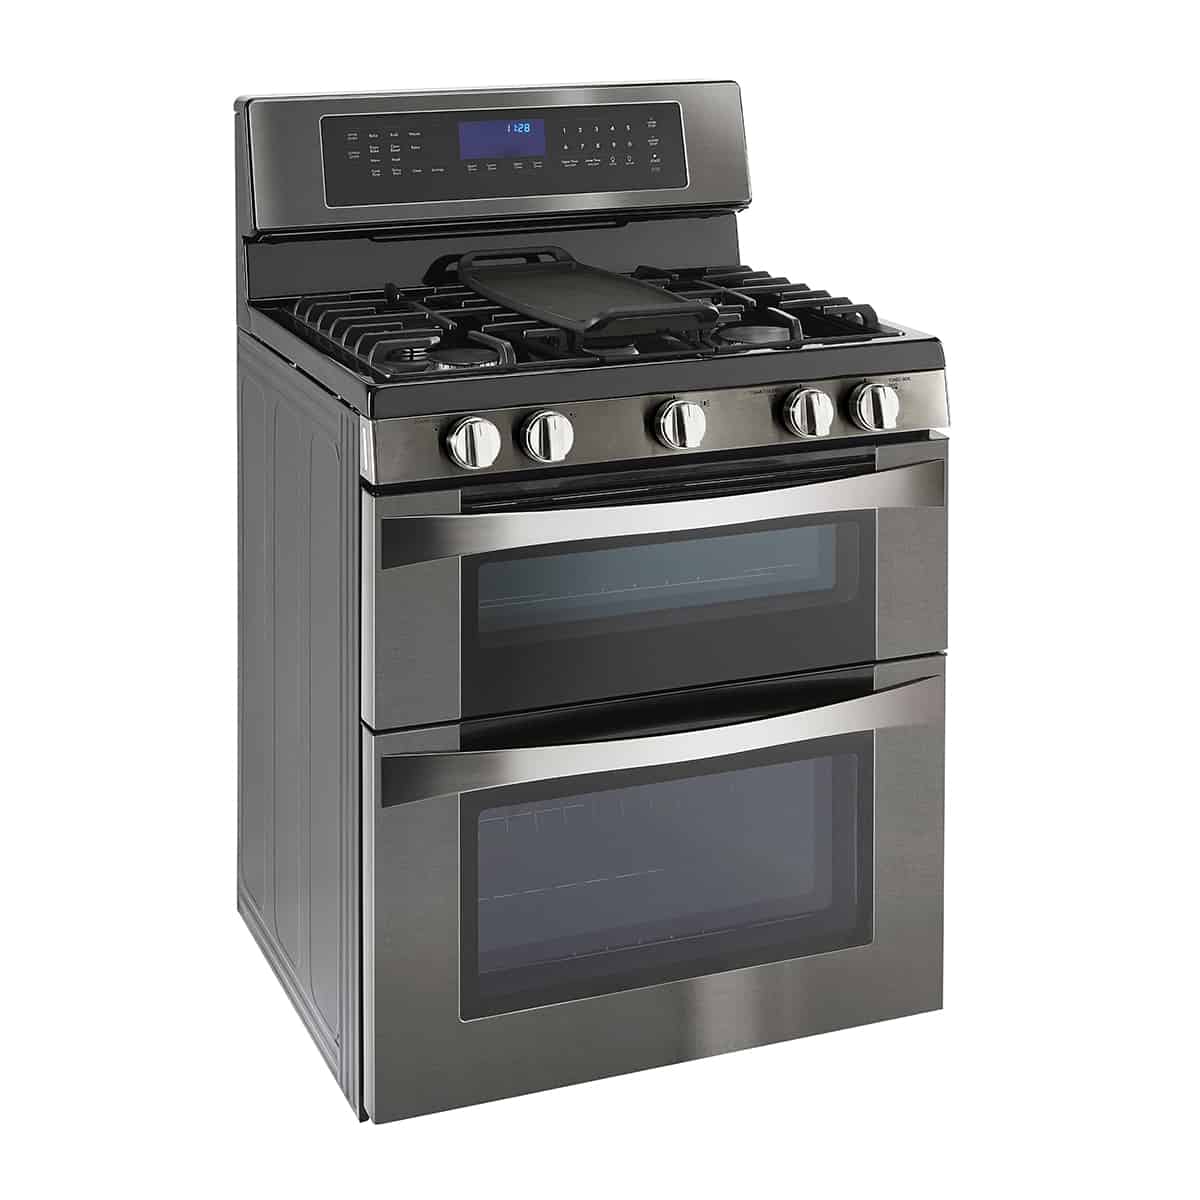 Ordering a new stove online